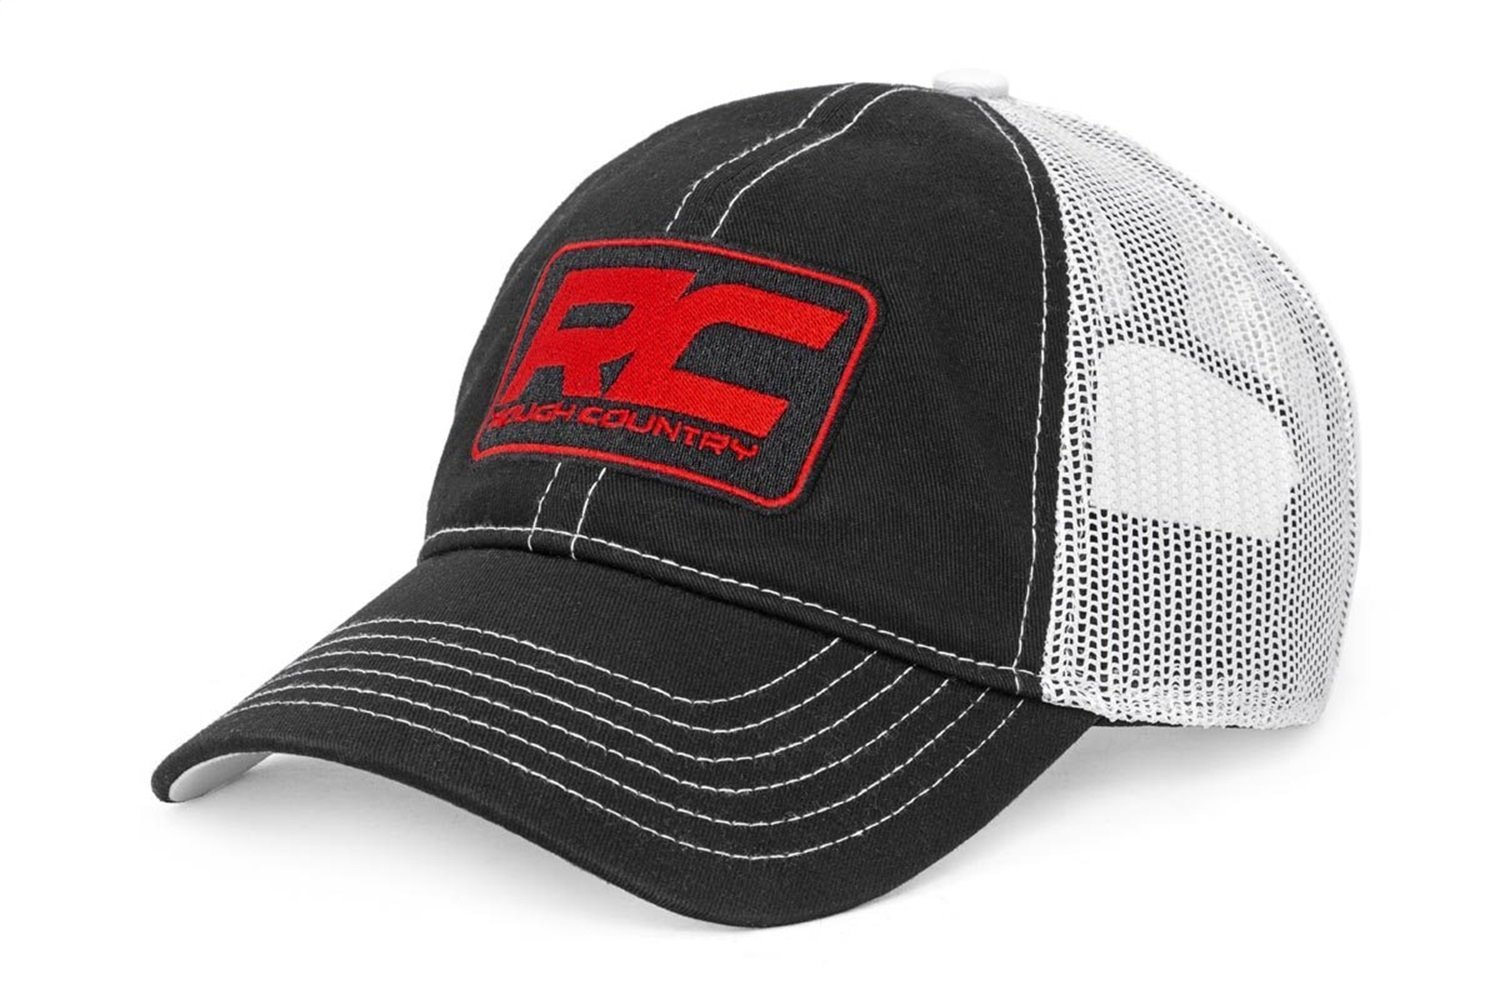 84125 Rough Country Mesh Hat - Black and White